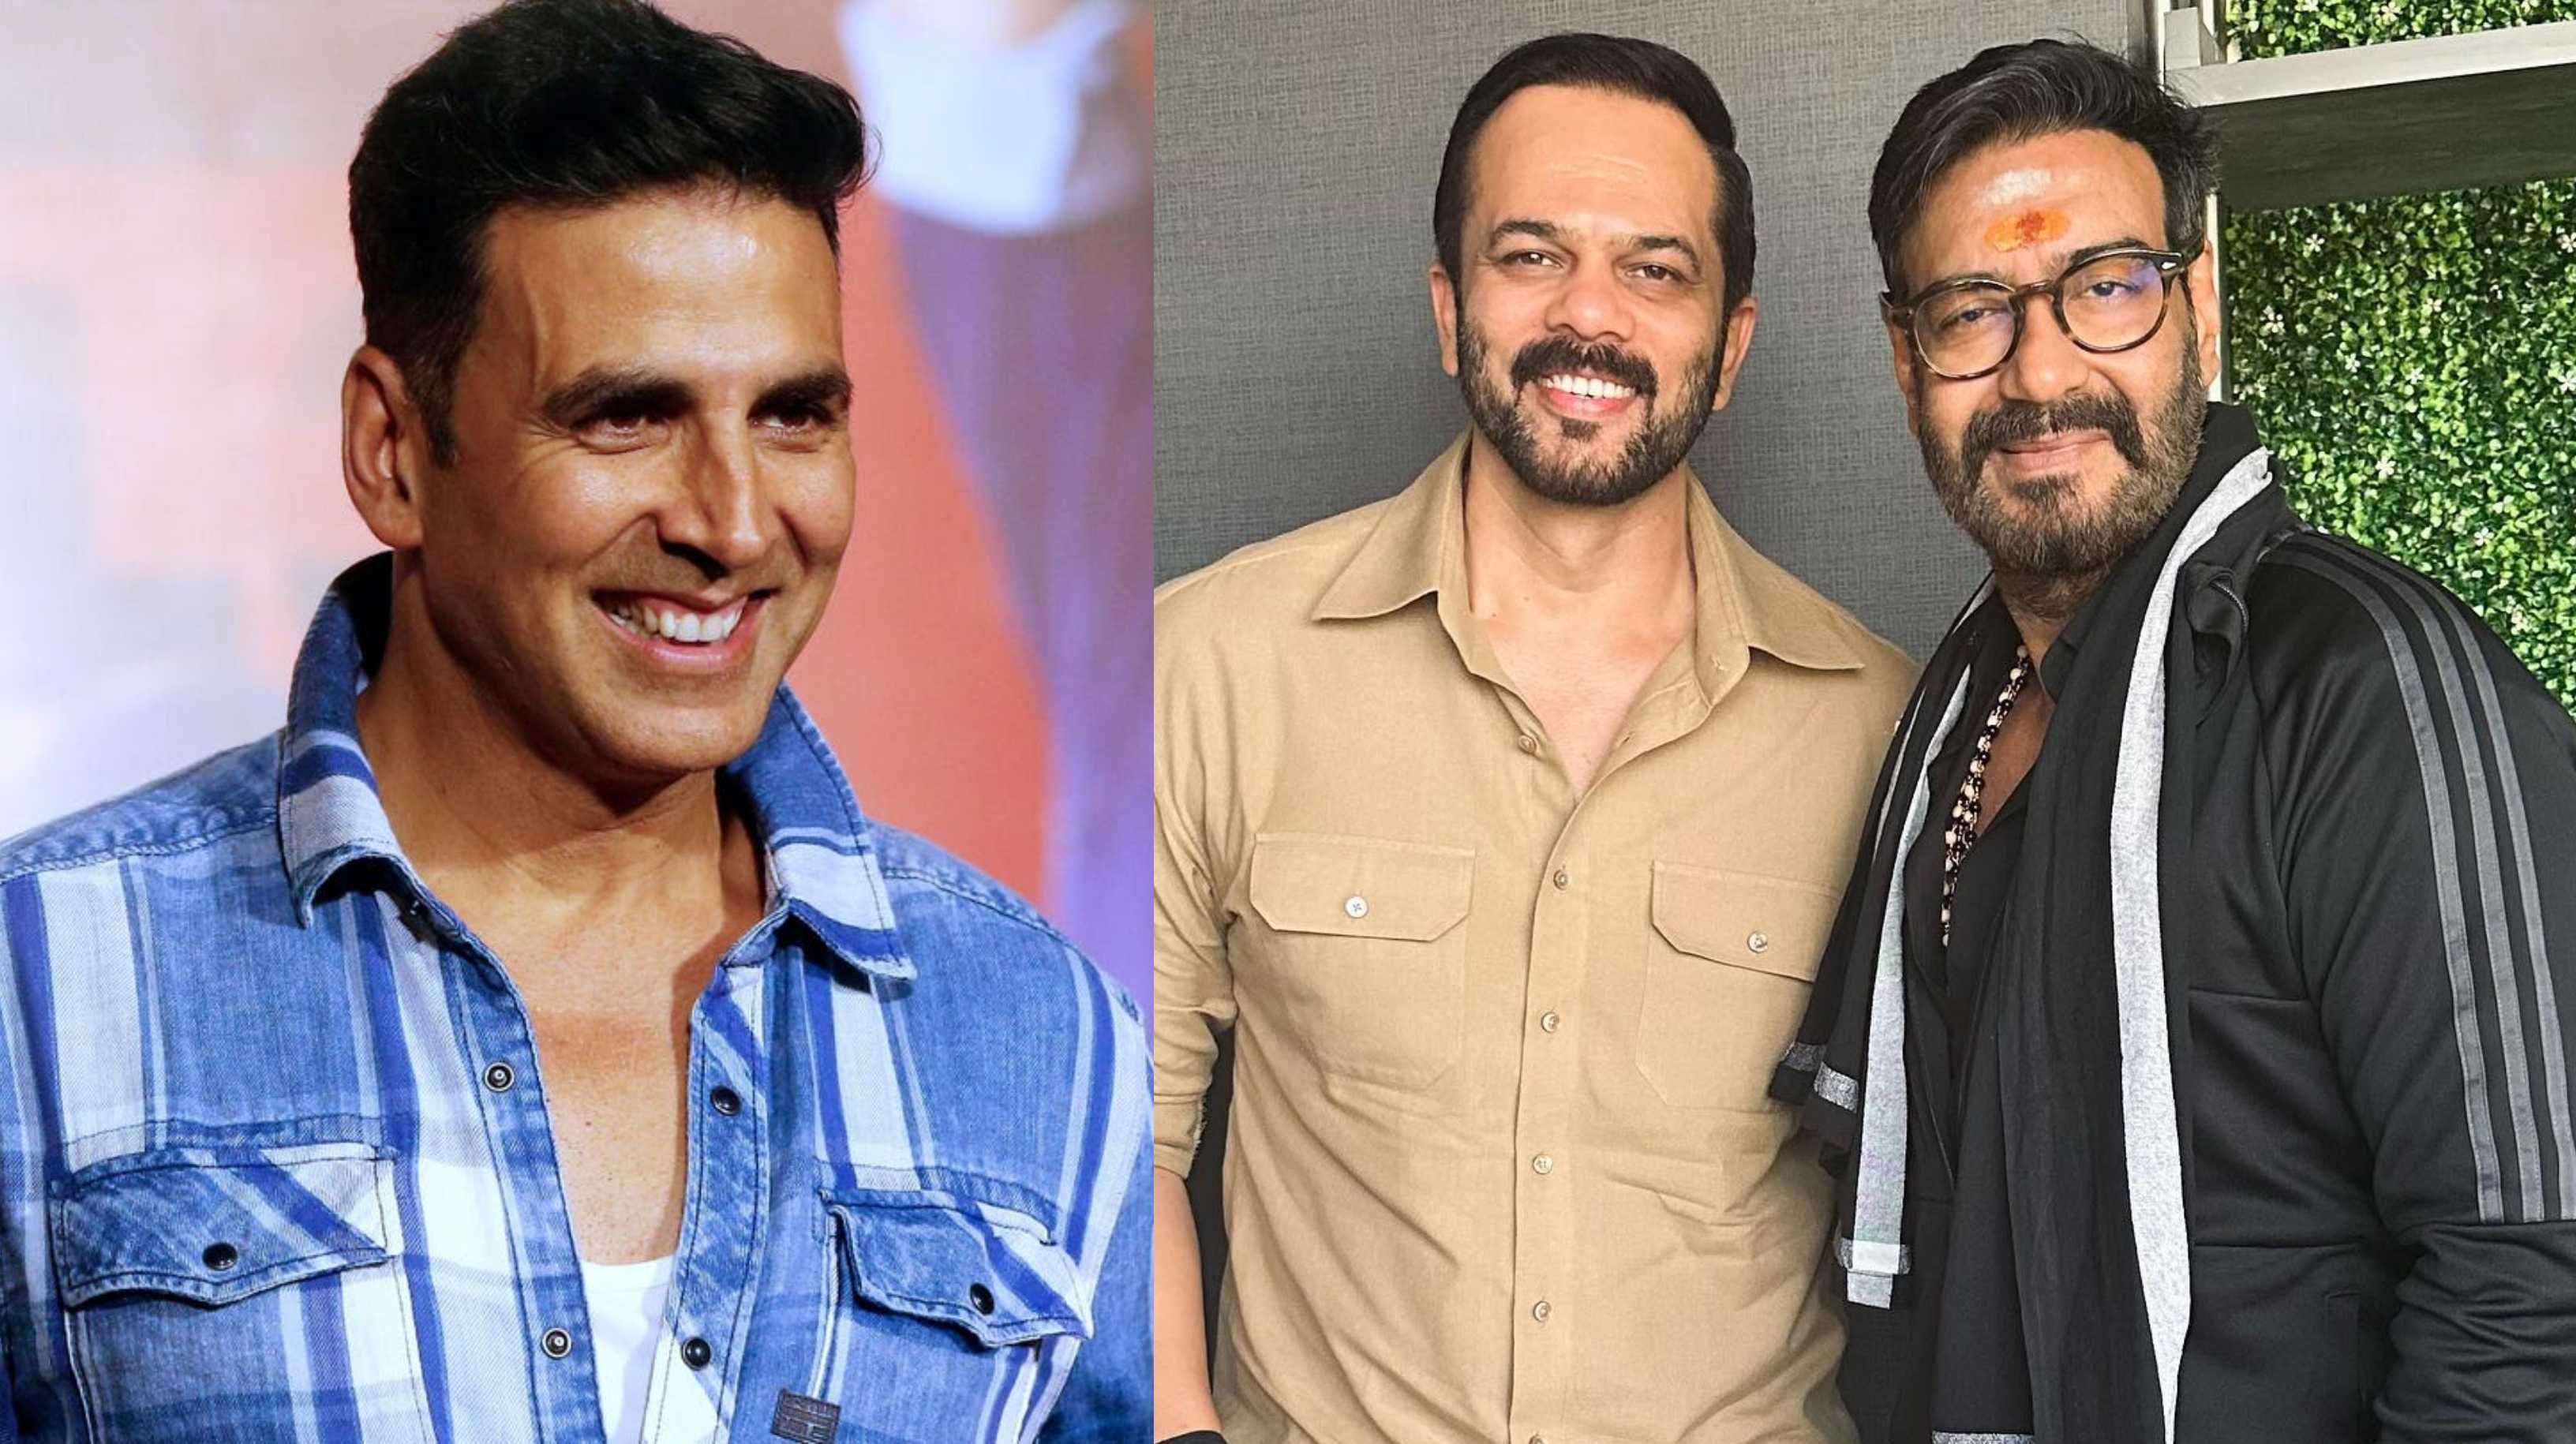 Ajay Devgn announces Singham Again, Akshay Kumar visits the circus; here’s why Rohit Shetty is getting trolled for both